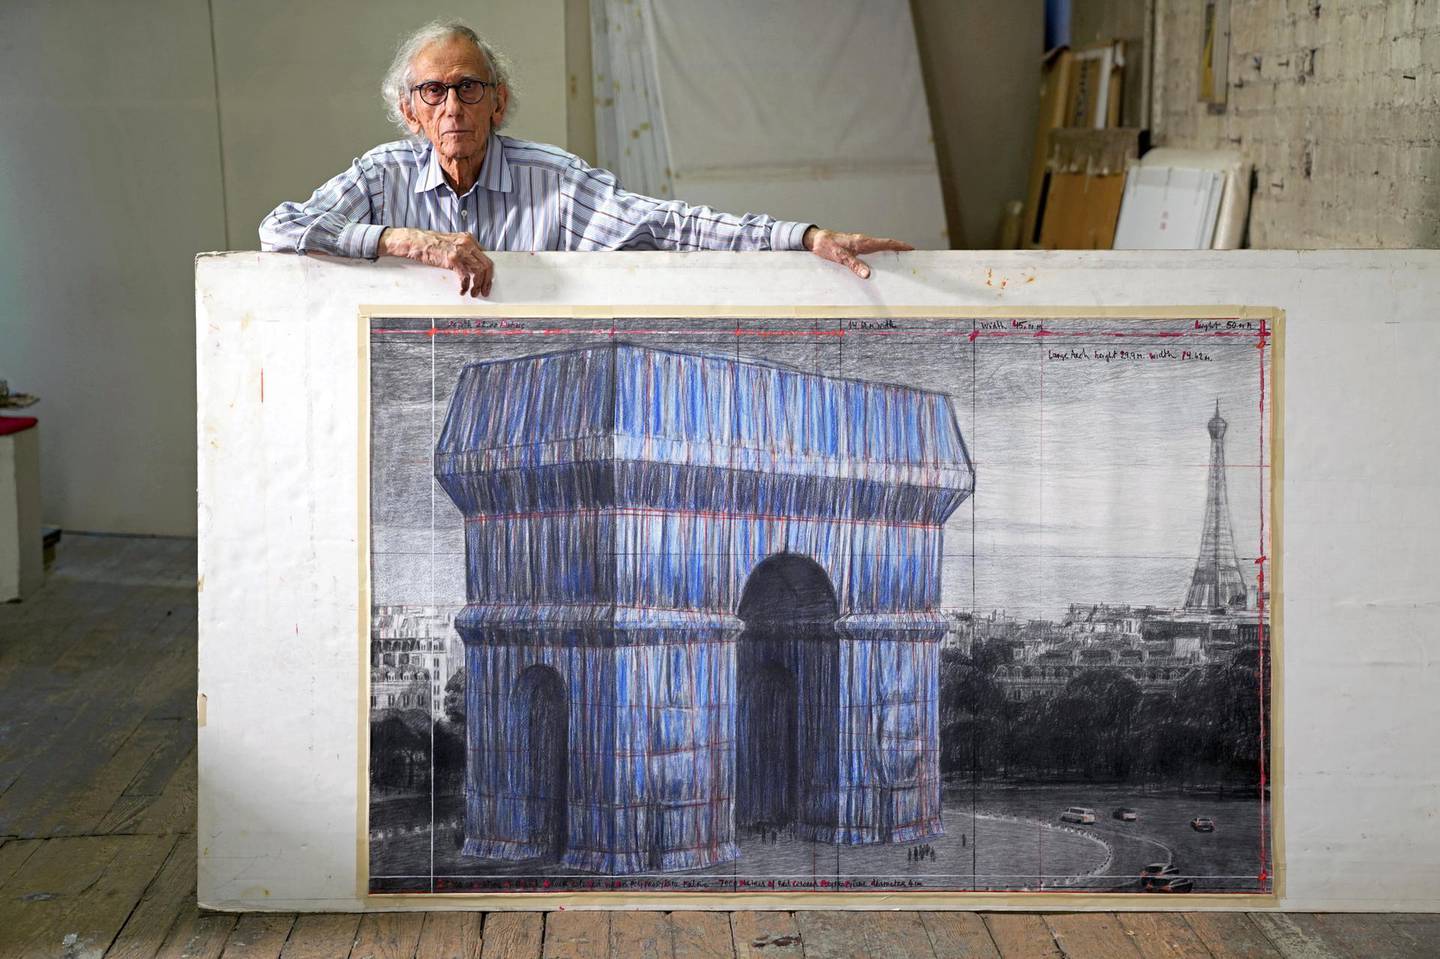 Christo in his studio in 2019 with a preparatory drawing for L'Arc de Triomphe, Wrapped. Courtesy Estate of Christo V Javacheff